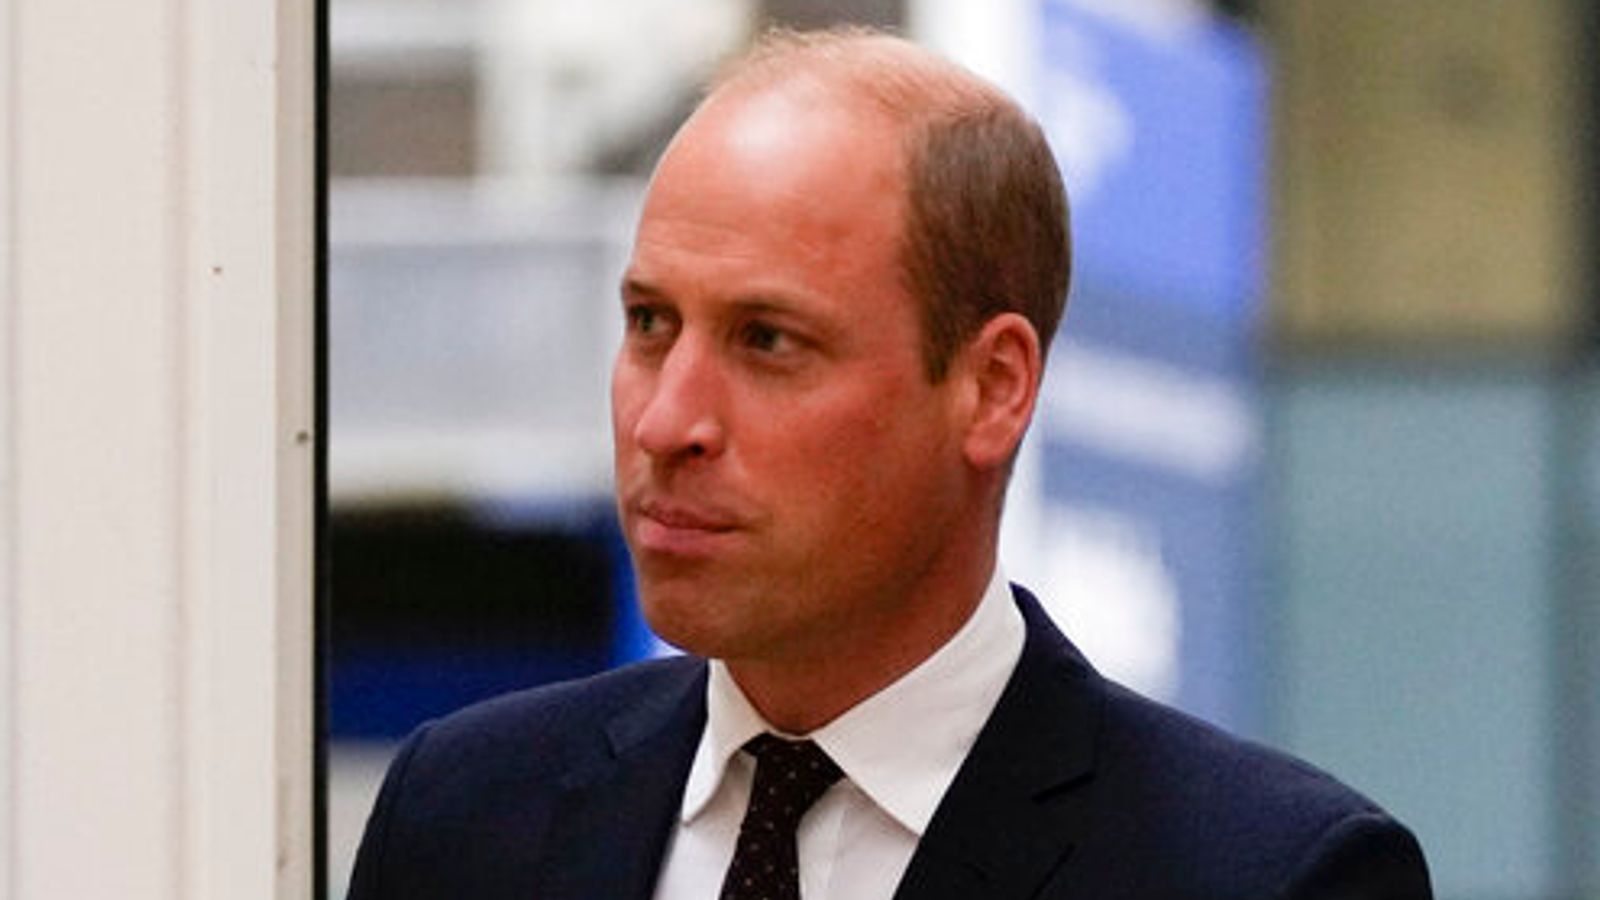 Prince William has signalled he won't be keeping quiet on the issues that matter to him